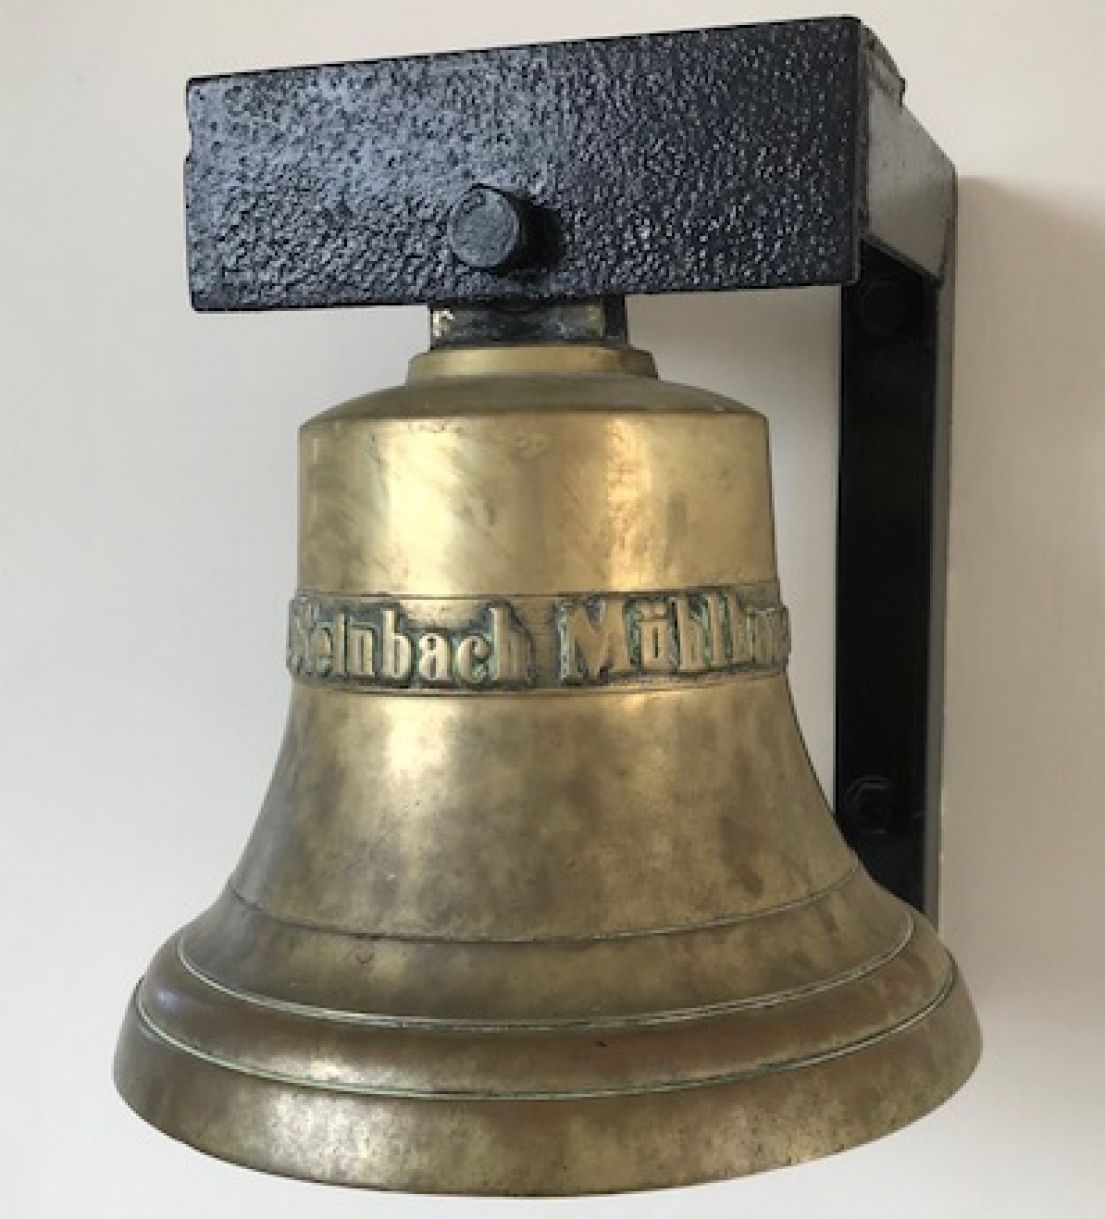 A brass bell mounted on the wall with some metal so it can still be rung.